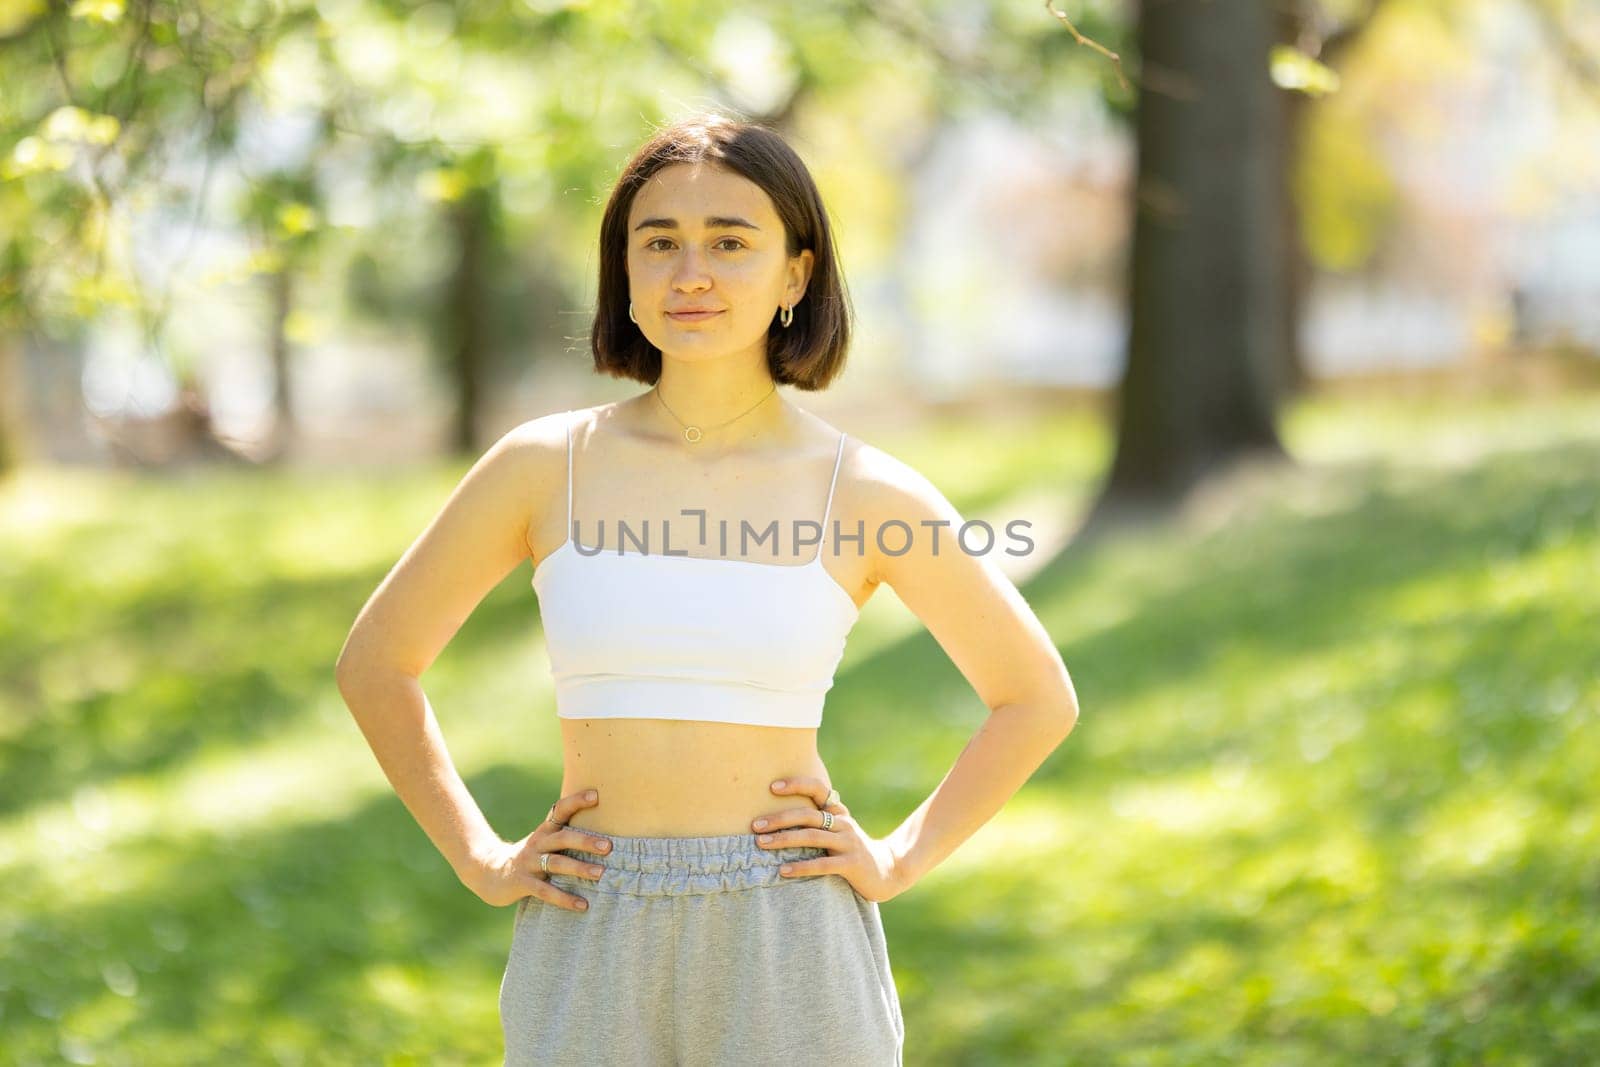 A woman is standing in a park, wearing a white tank top and grey sweatpants. She is posing for a picture, and her body language suggests that she is confident and comfortable in her outfit